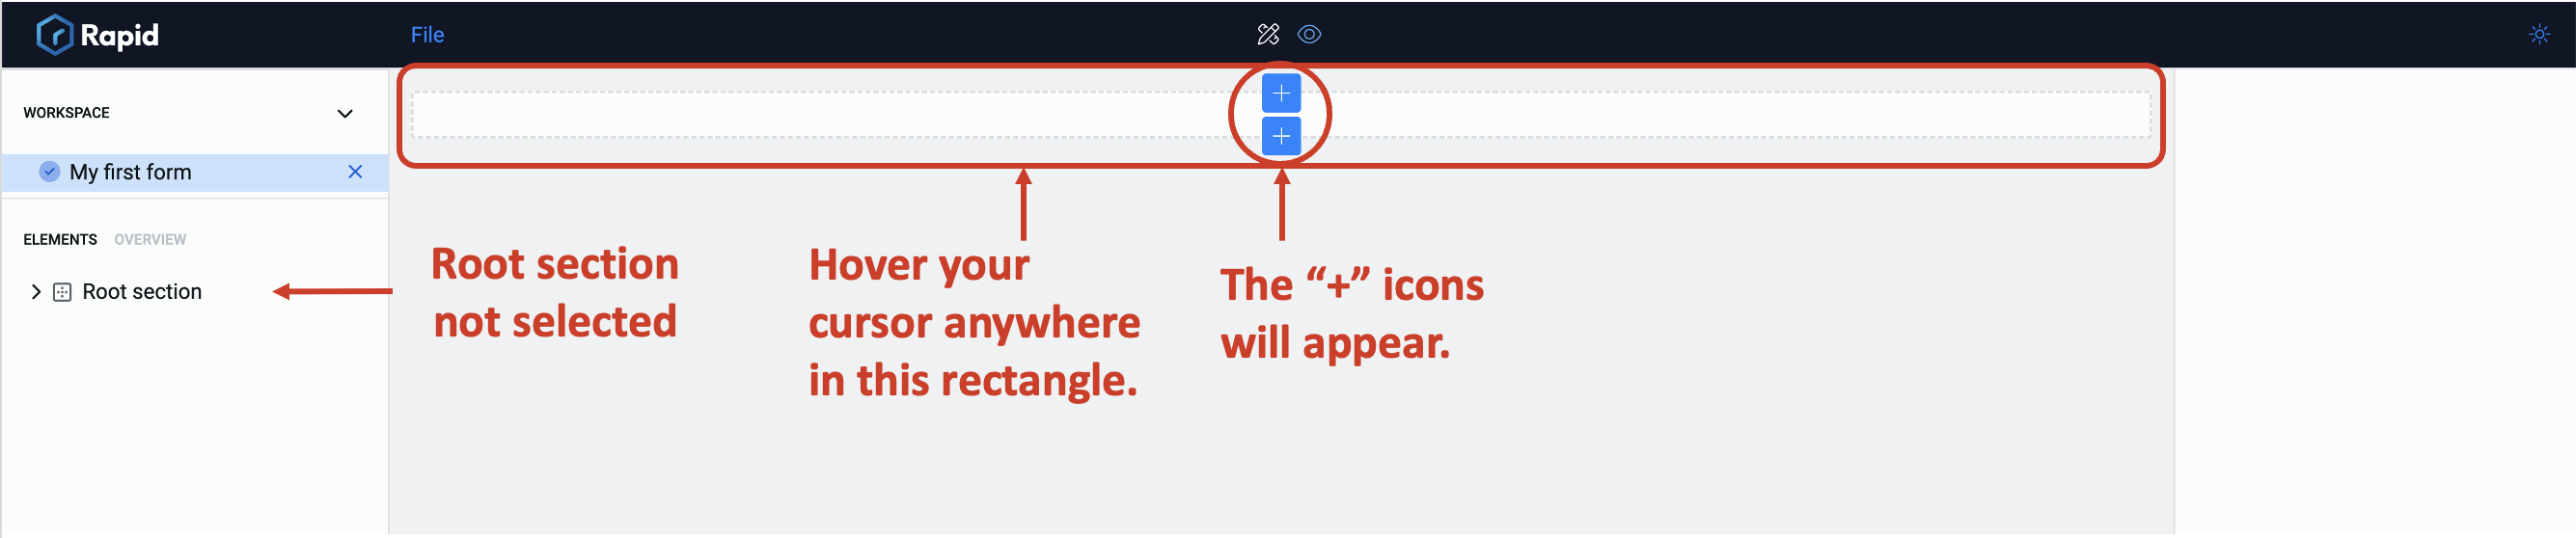 Image showing icons to add elements when section is not selected